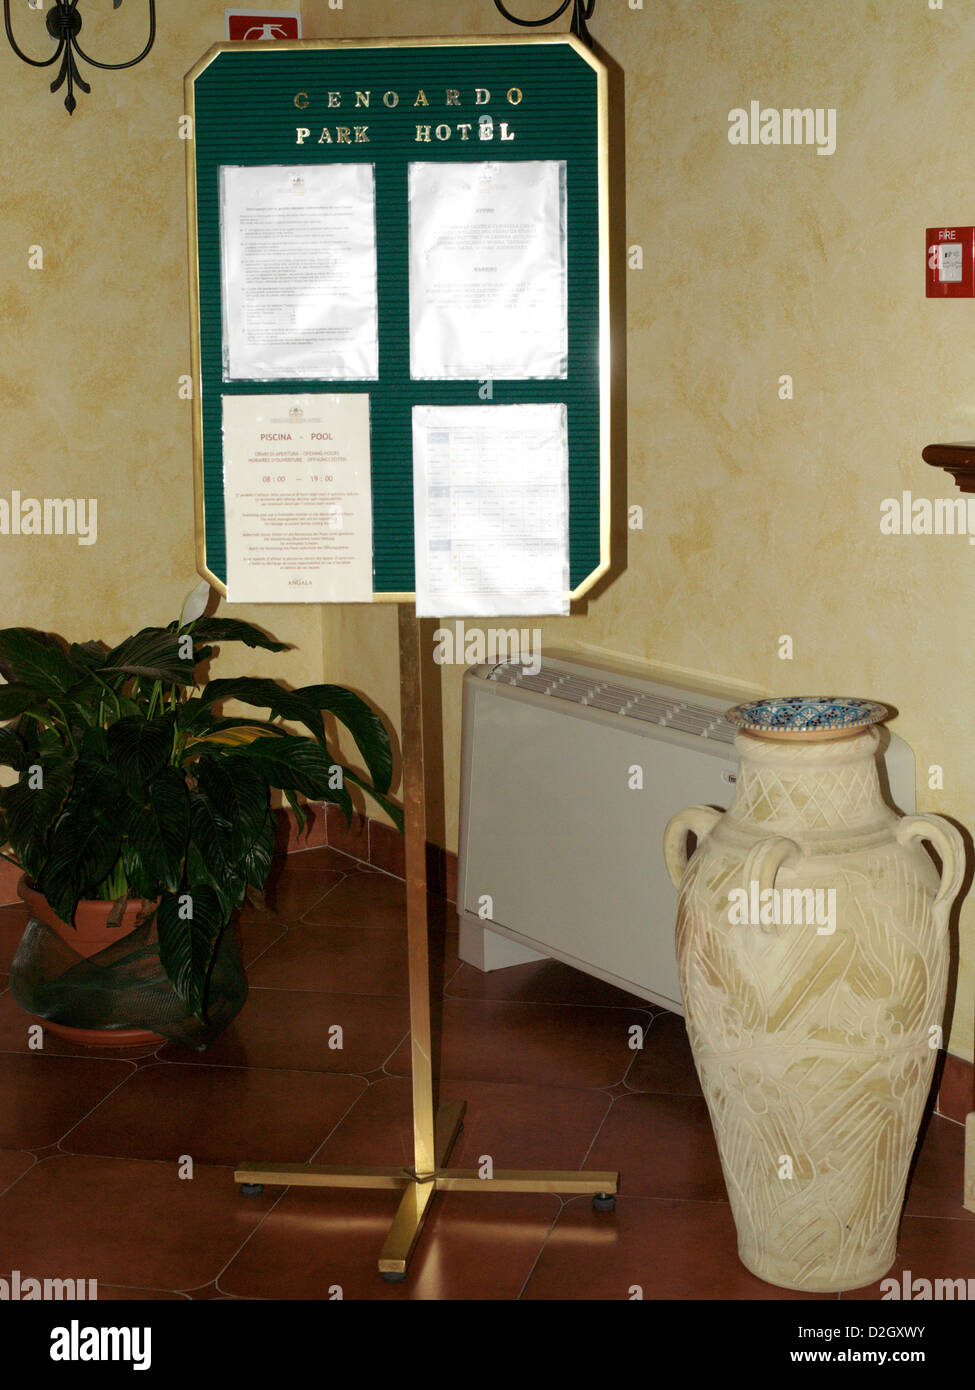 Palermo Sicily Italy Genoardo Park Hotel Notice Board with Menu and Pool Rules Stock Photo